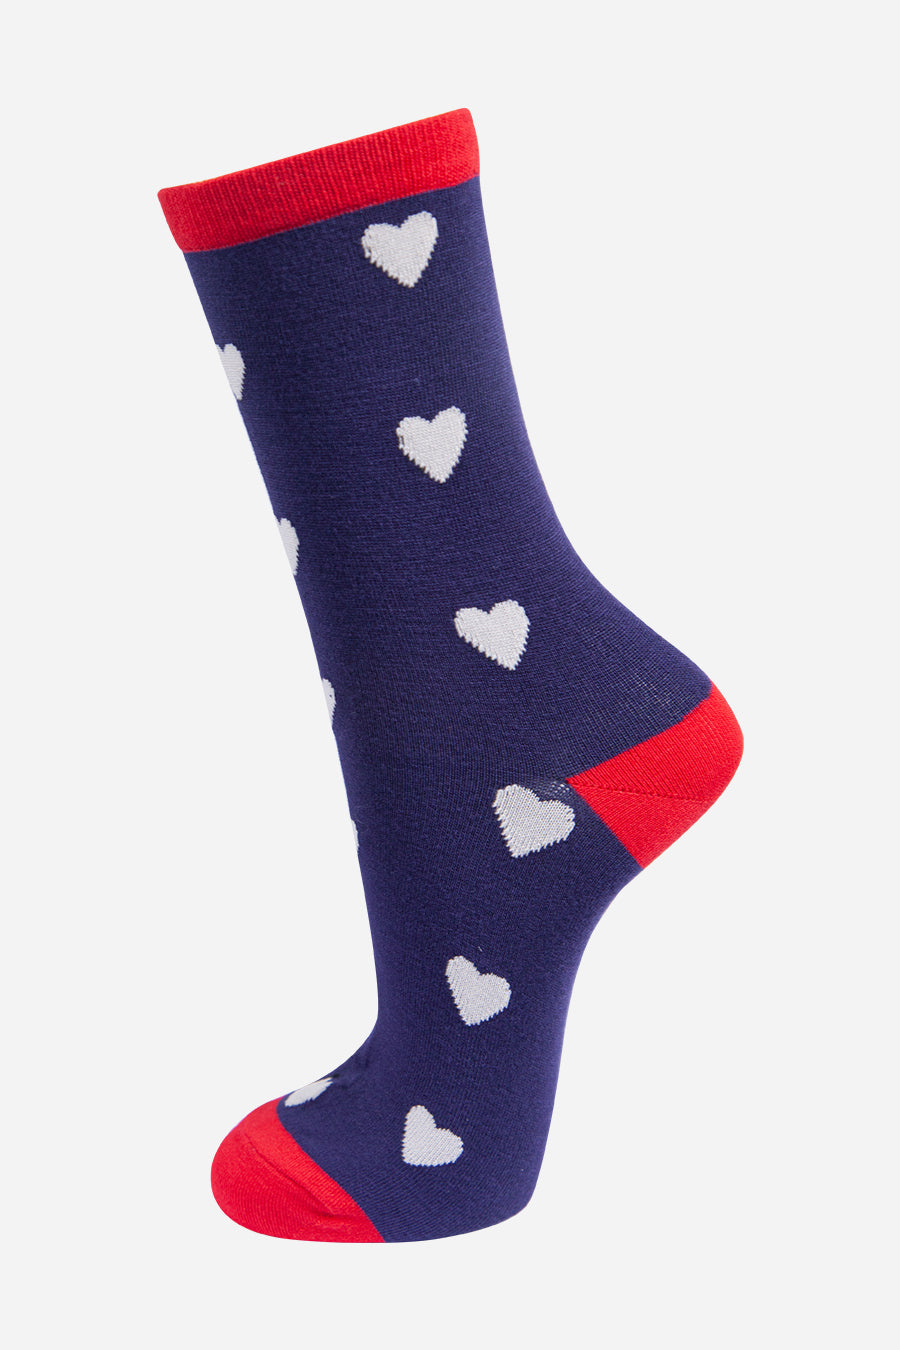 navy blue ankle socks with a red heel, toe and cuff with an all over white love heart pattern